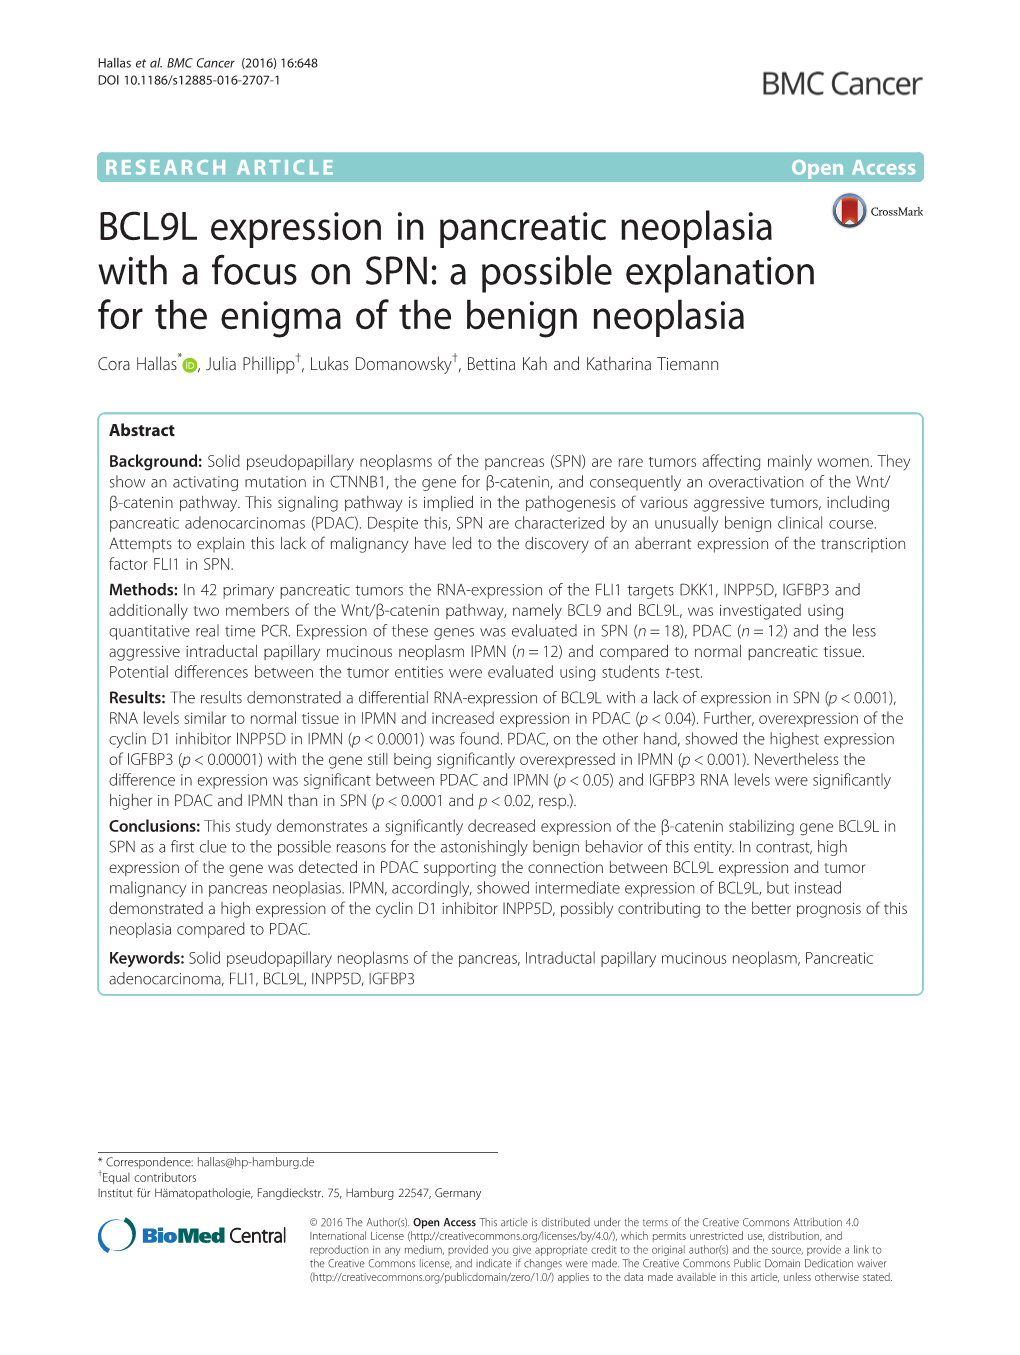 BCL9L Expression in Pancreatic Neoplasia with a Focus on SPN: A